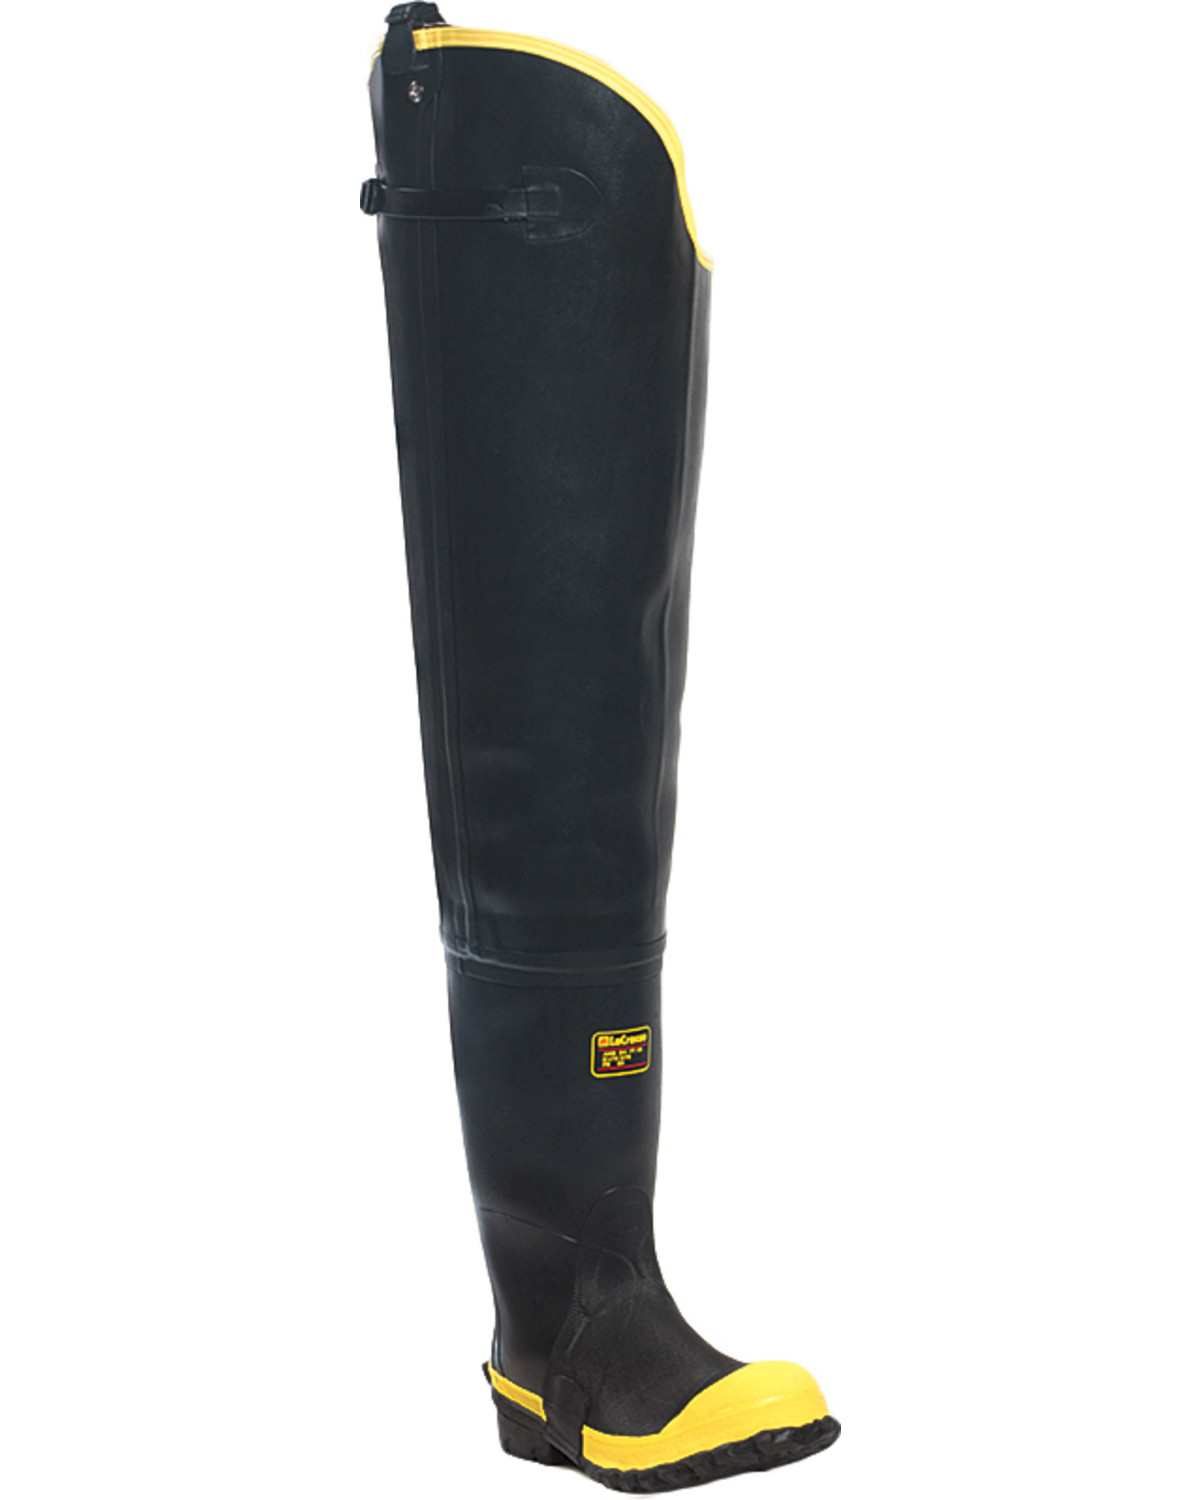 Lacrosse Men's Storm Insulated 31" Hip Boots - Steel Toe